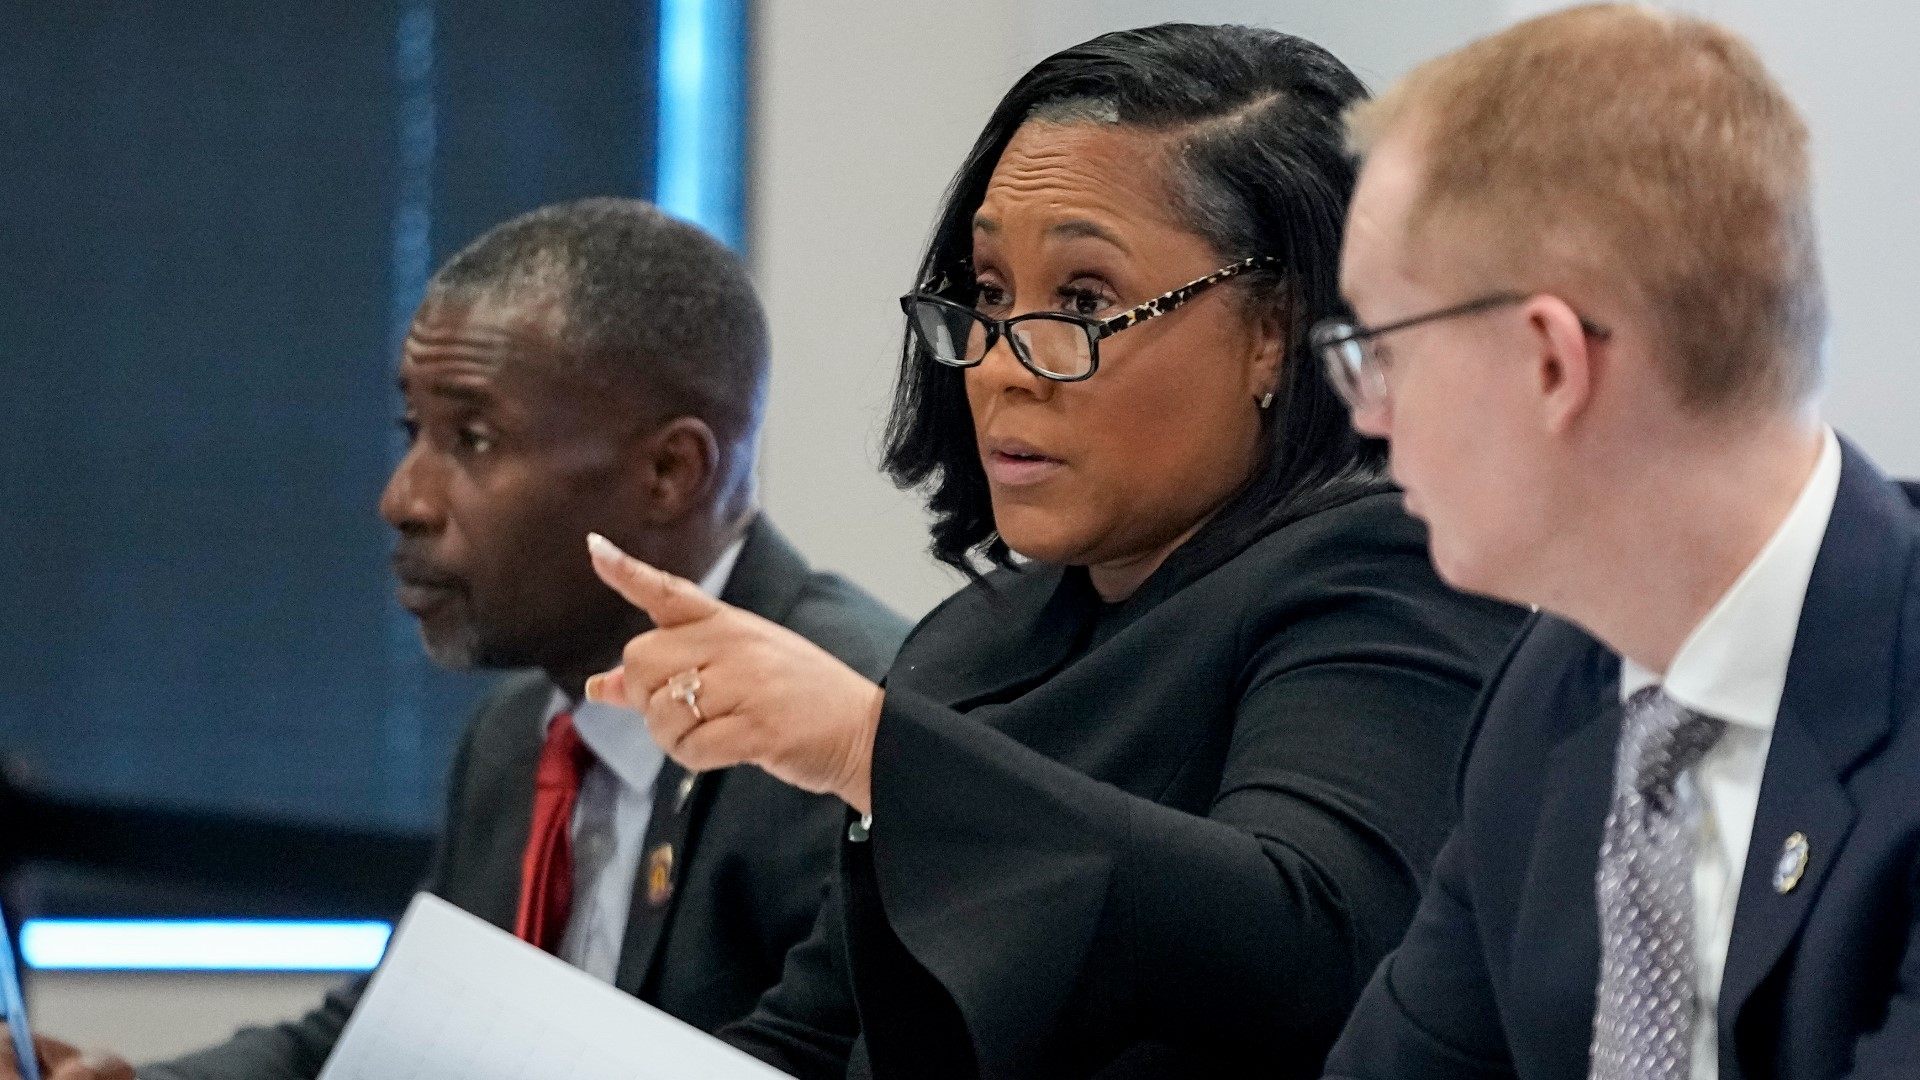 Fulton County DA, Fani Willis read the names aloud of the 19 defendants indicted in Georgia's election probe during a press conference Monday night.